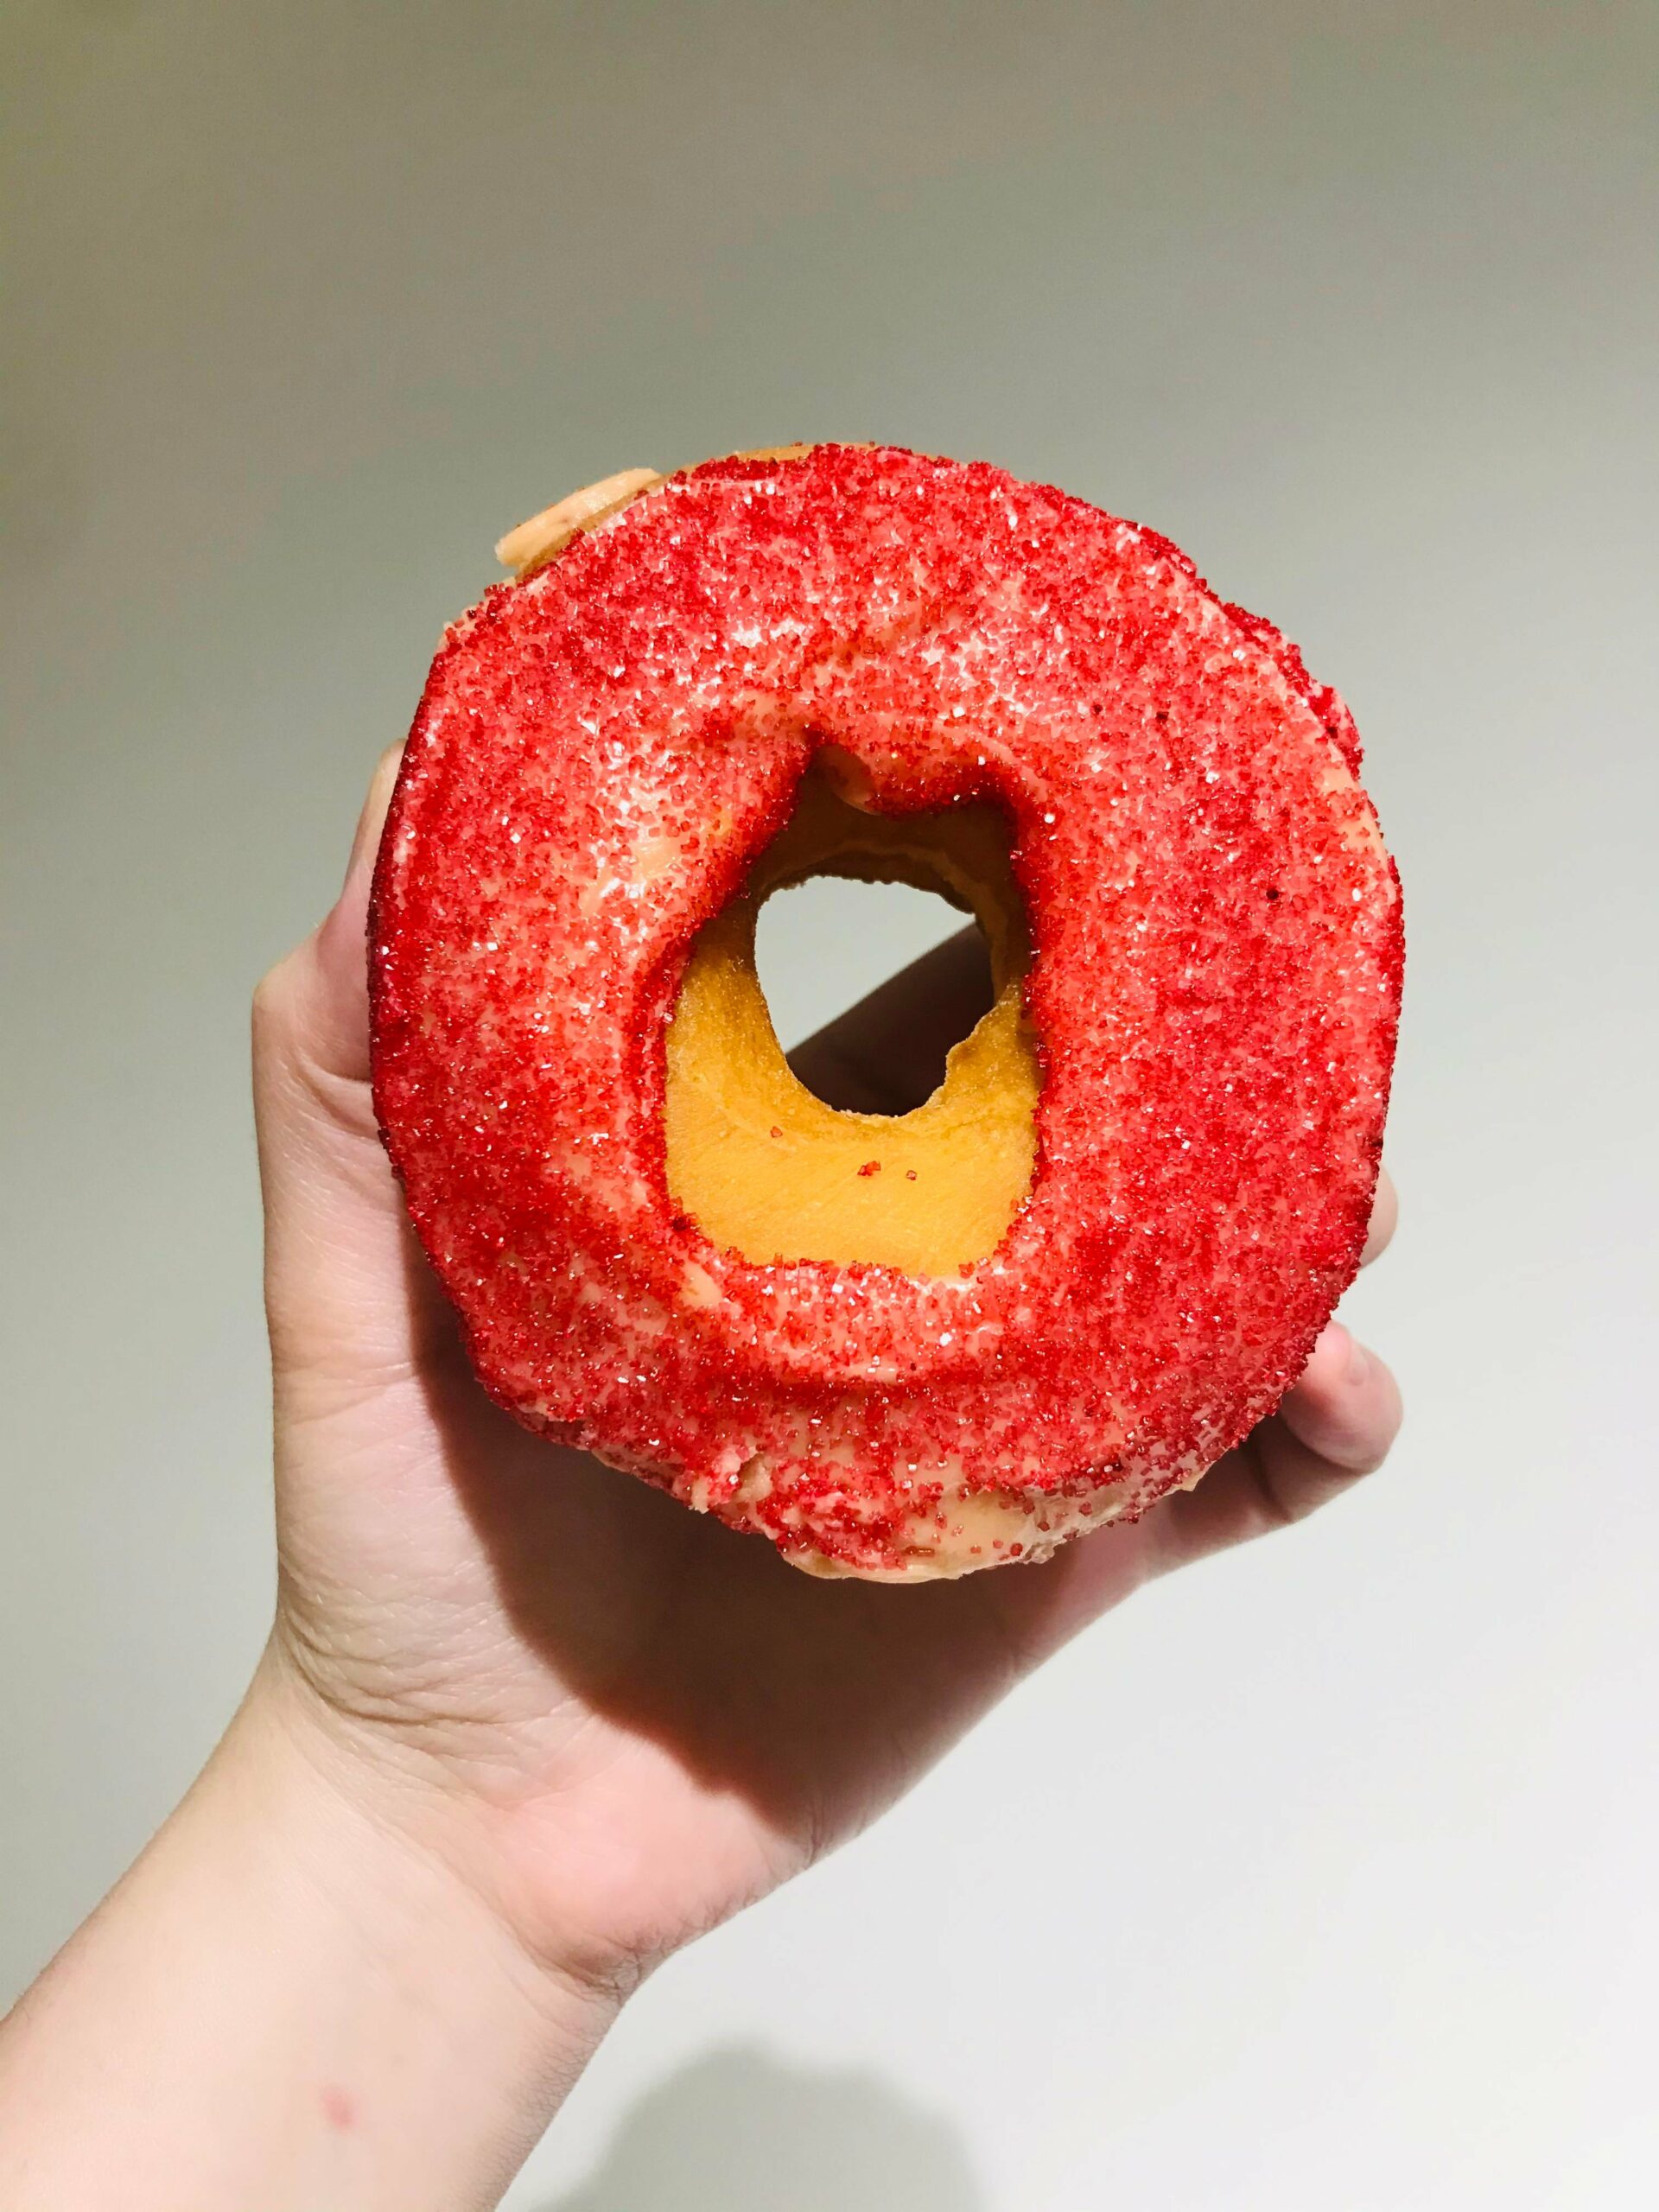 Tried The Spicy Ghost Pepper Donut From Dunkin Donuts Today Chili Chili